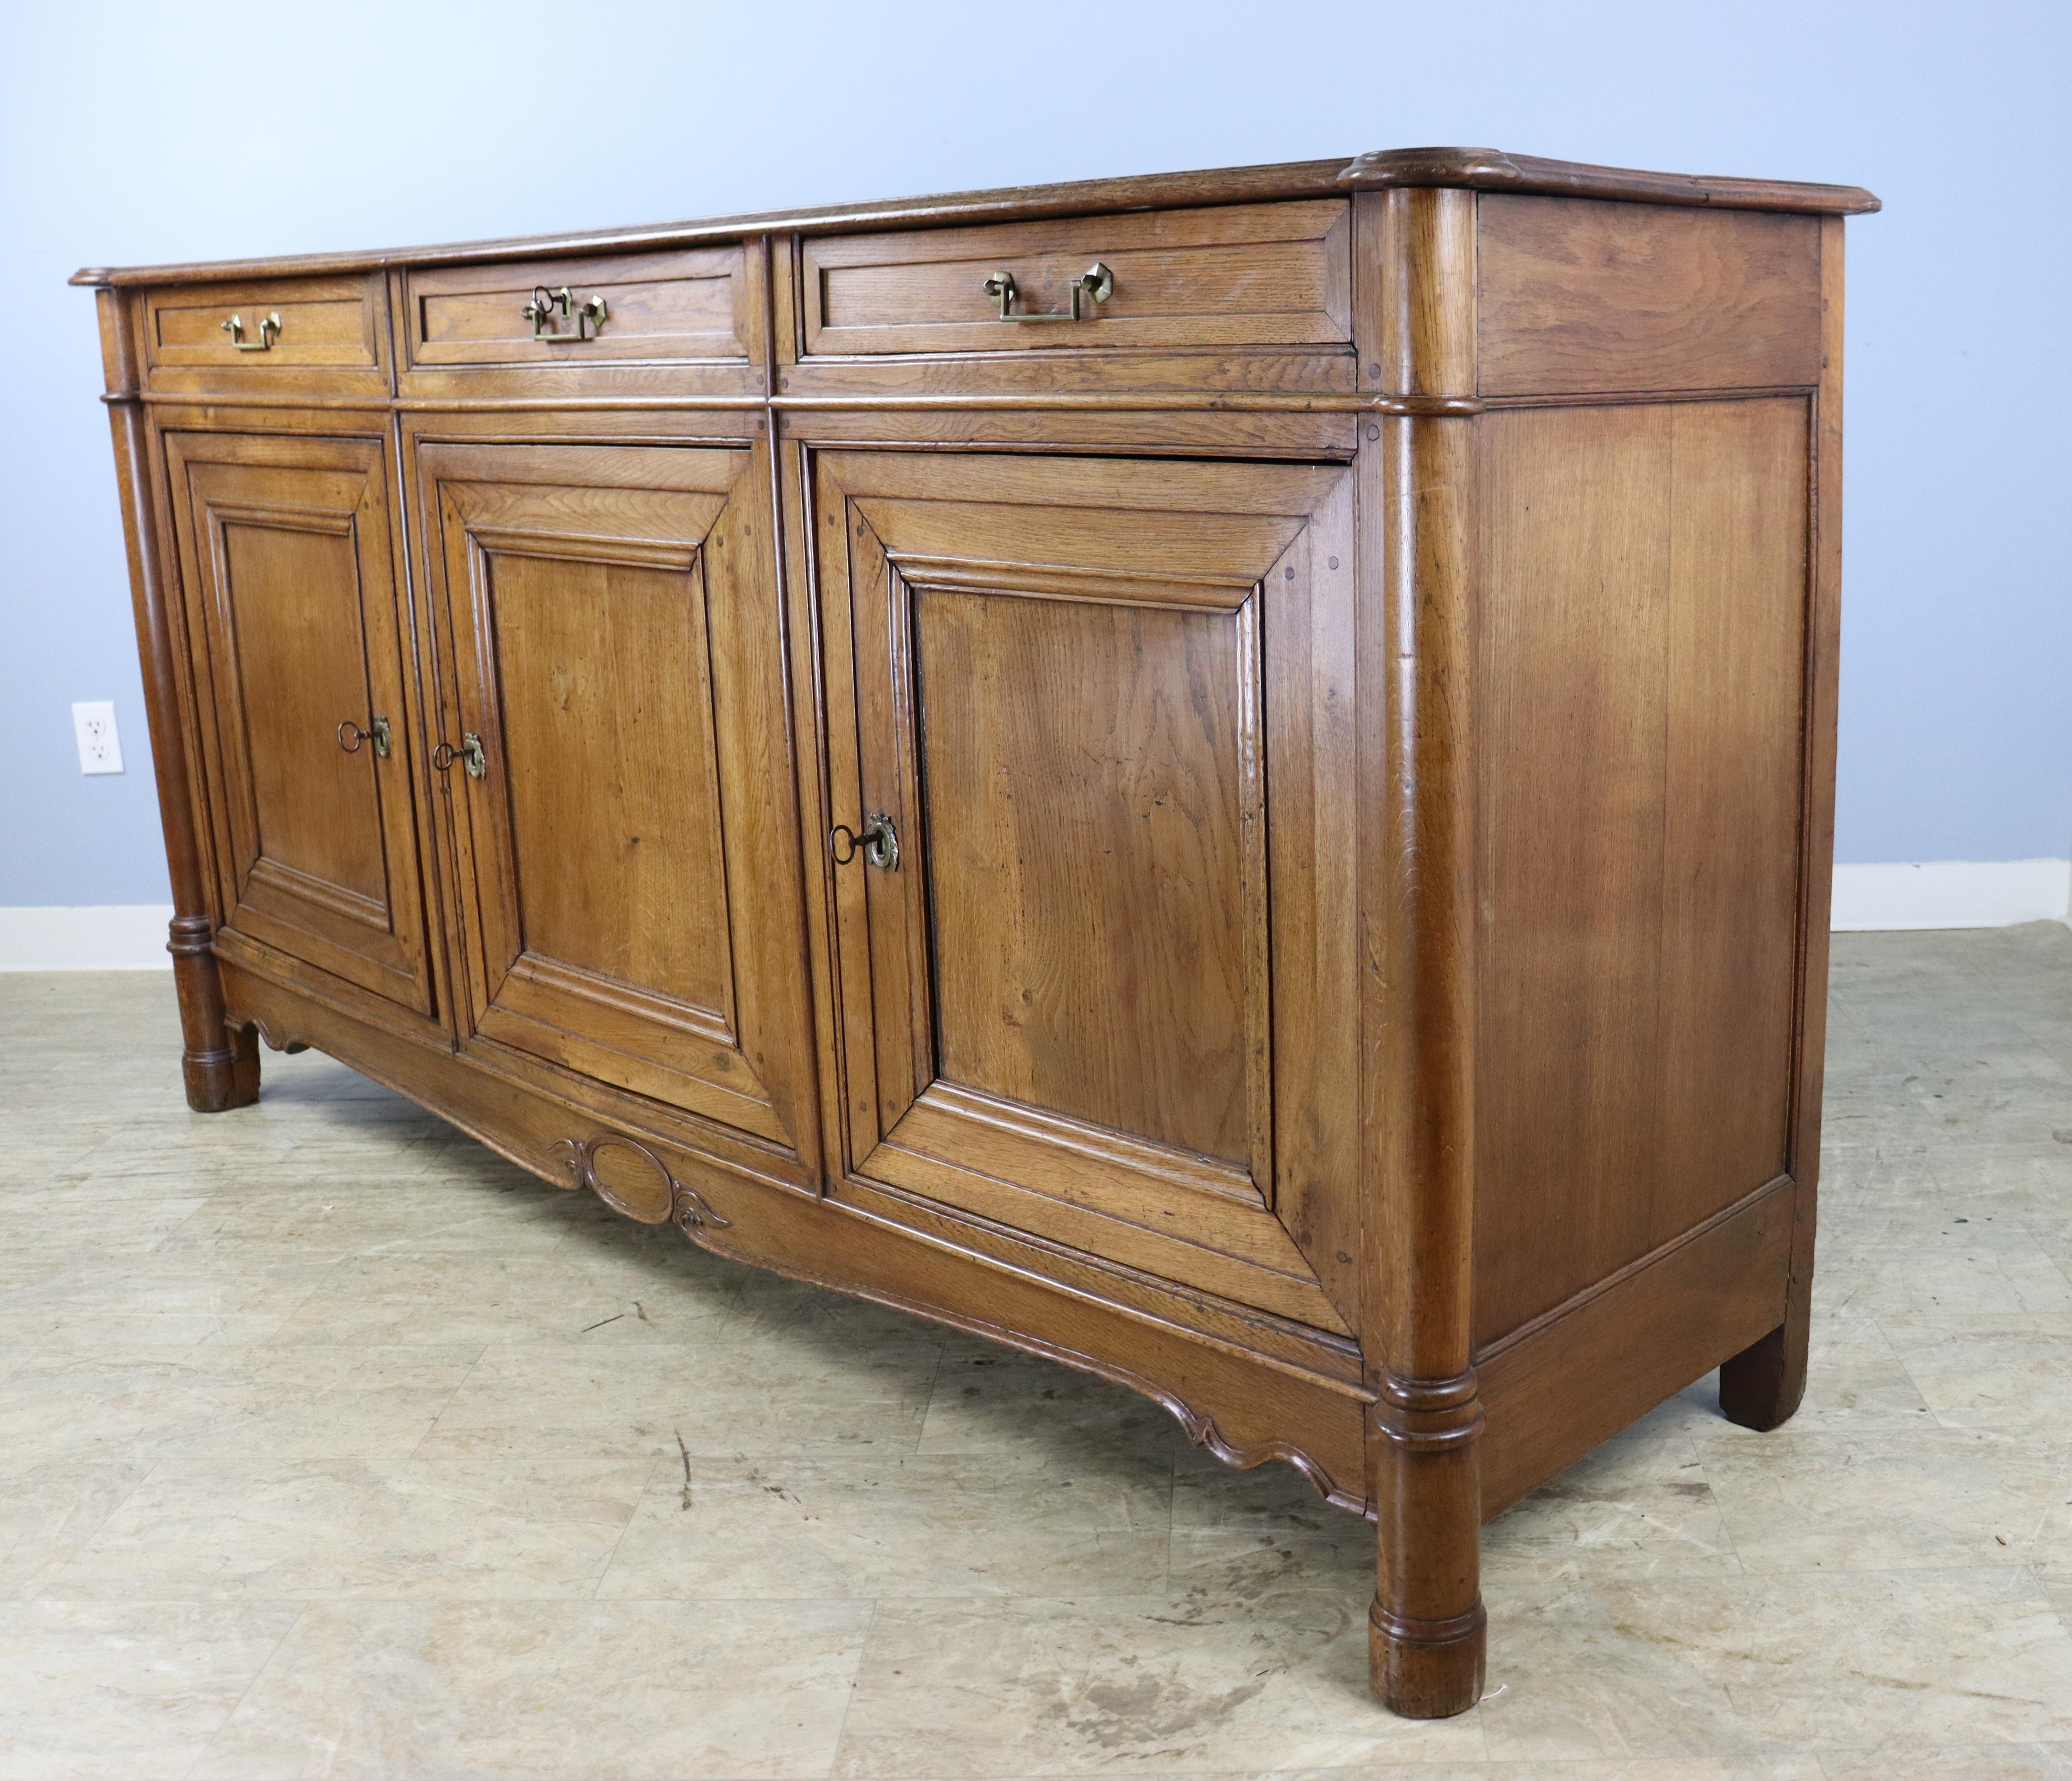 A handsome large three door oak buffet with wonderful oak color and soft patina.  The three doors open to a roomy single storage space.  Each door has its own key.  Elegant 3/4 column detail at the top corners and front feet and a whimsical carved